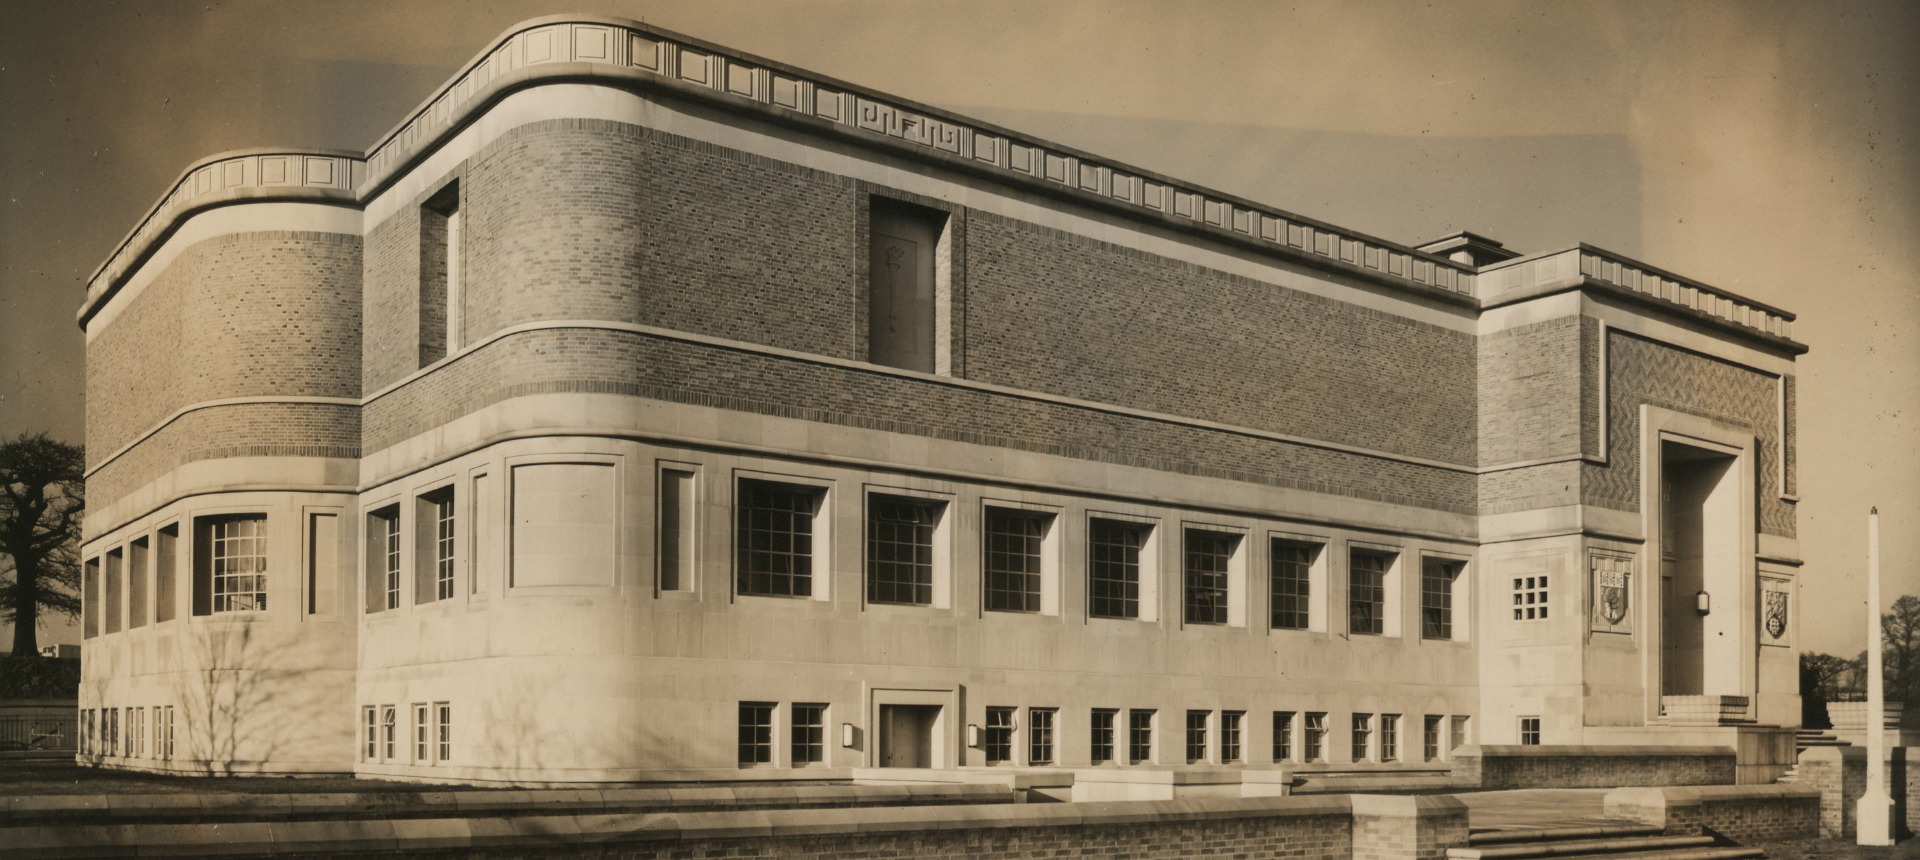 An old black and white photo of the Barber Institute, an Art Deco building.